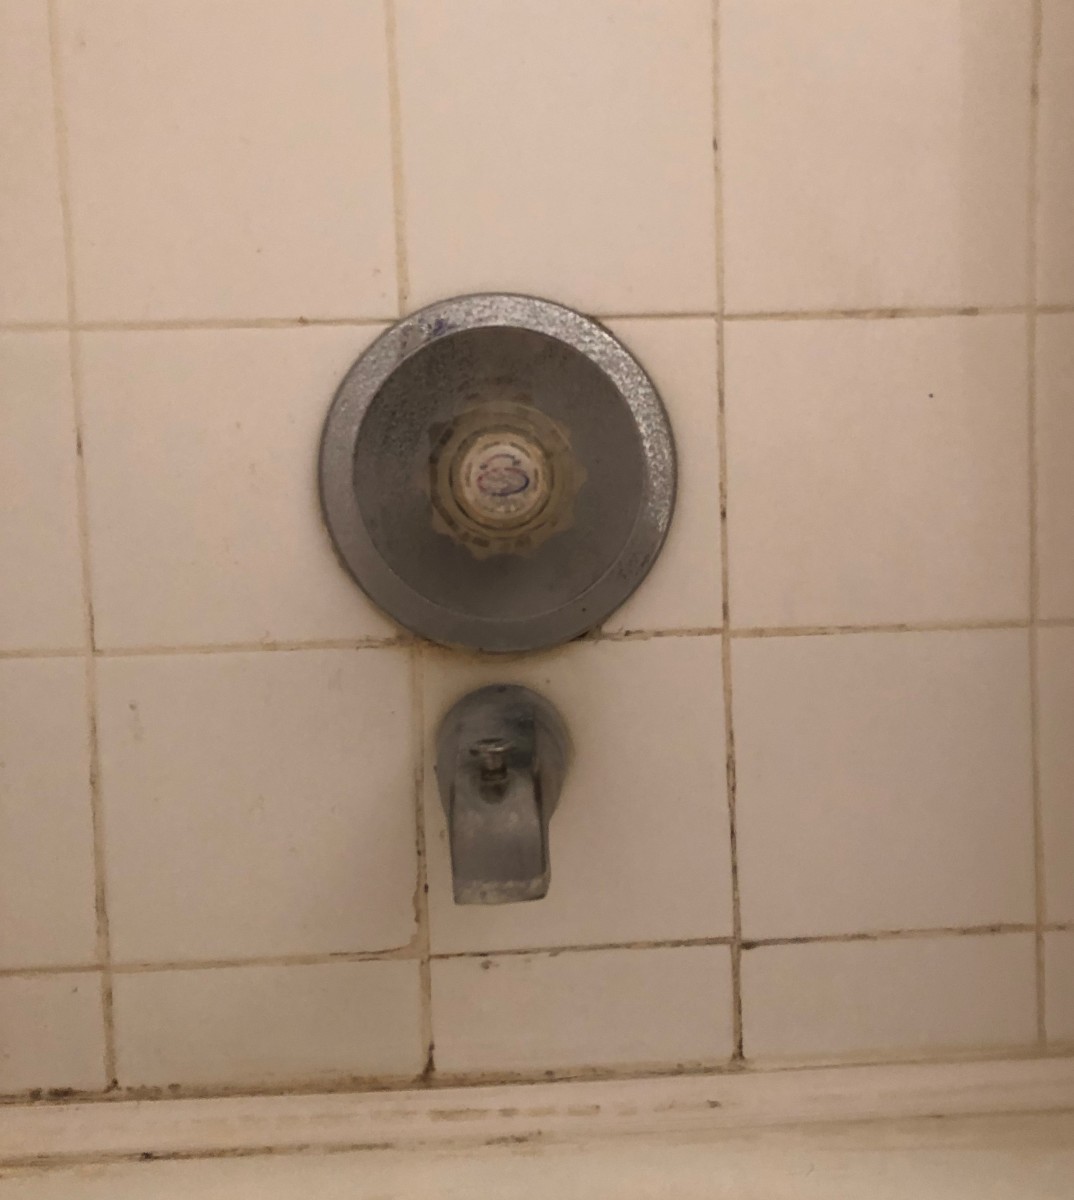 Replace A Single Handle Shower Valve, How To Remove Stem From Bathtub Faucet